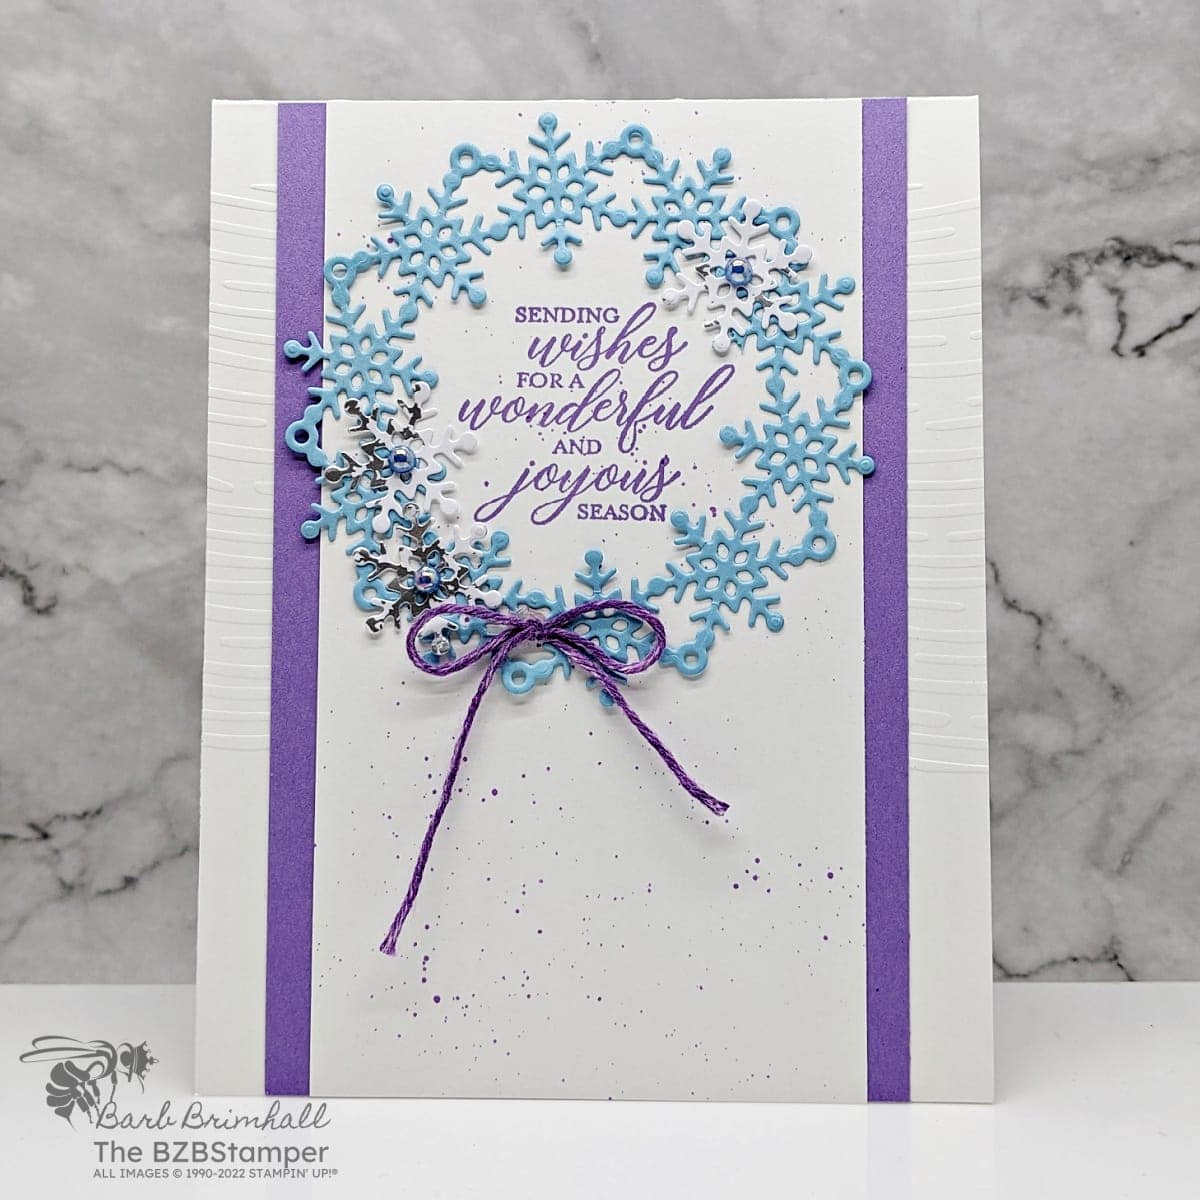 Christmas card in blues and purples featuring a wreath of snowflakes and a sentiment "sending wishes for a wondering and joyous season."